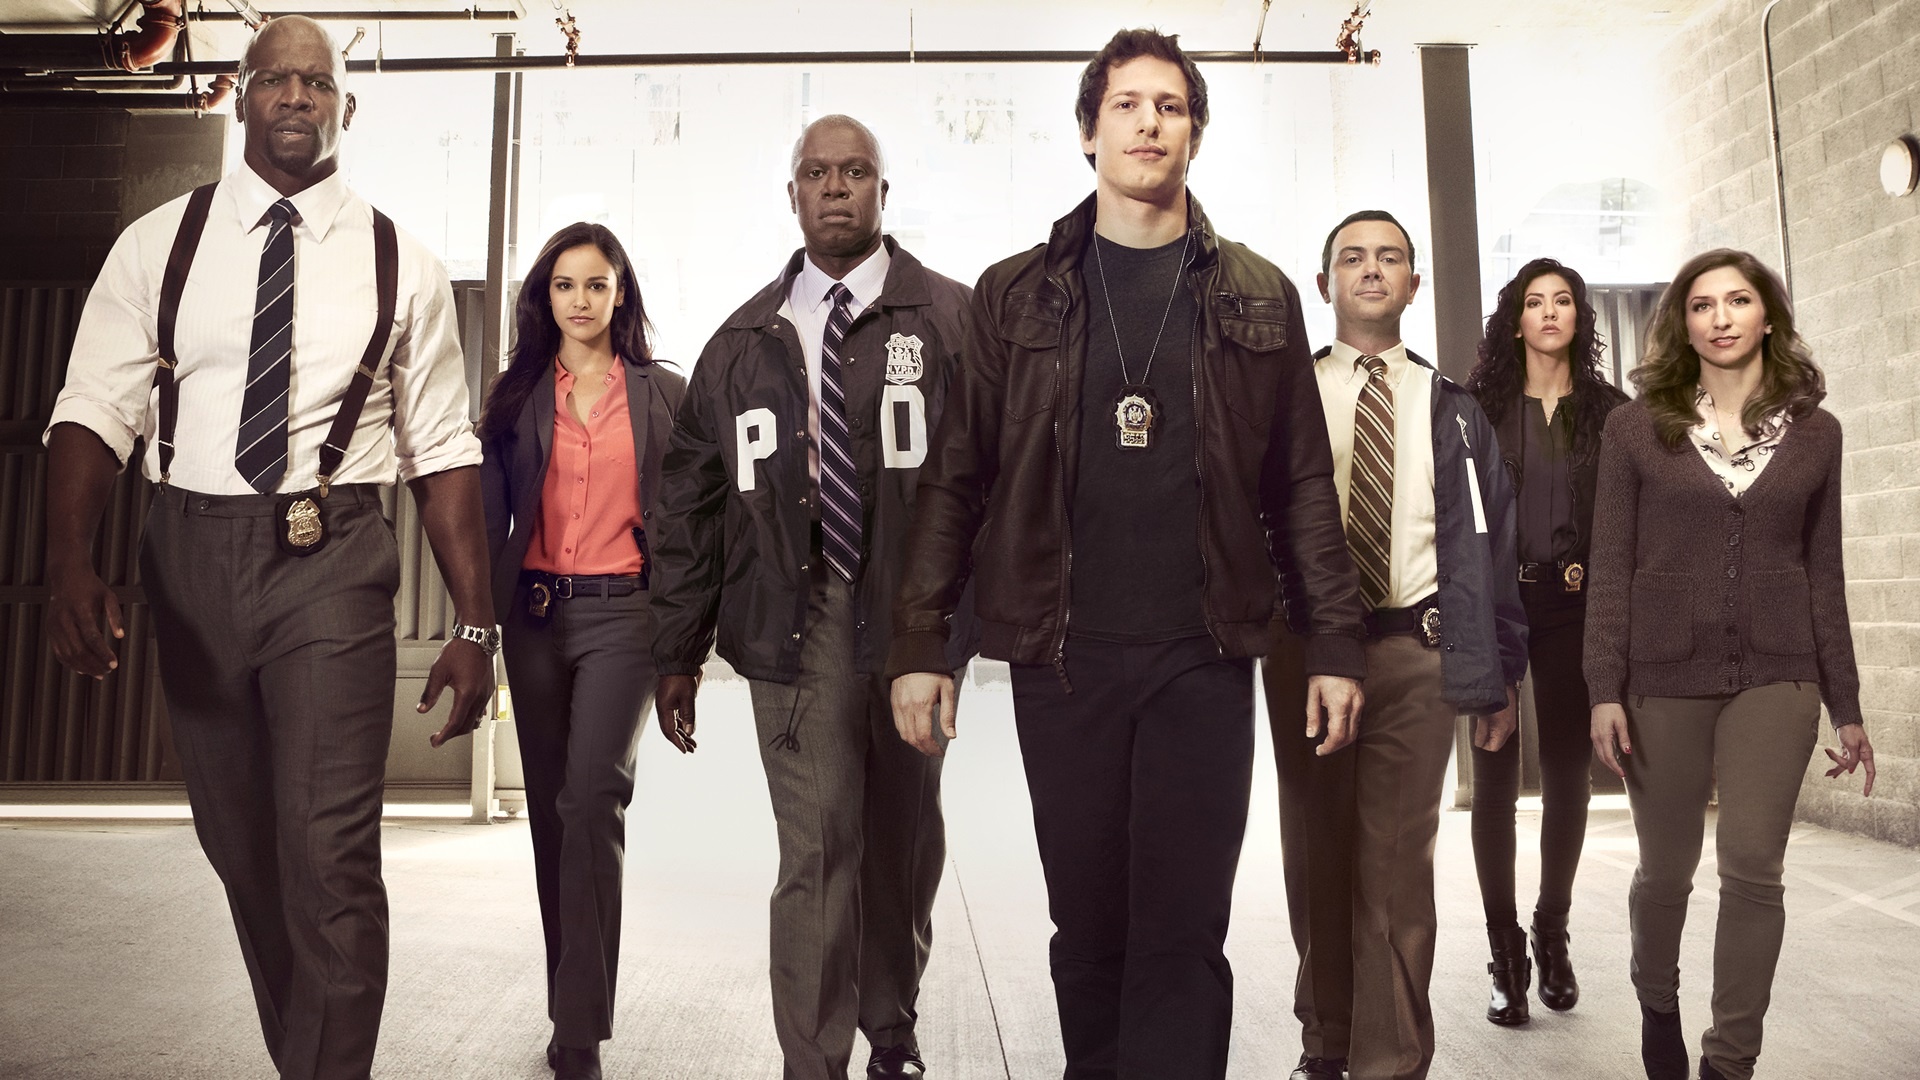 Brooklyn Nine-Nine (TV Series): Loveable and offbeat squad of detectives. 1920x1080 Full HD Background.